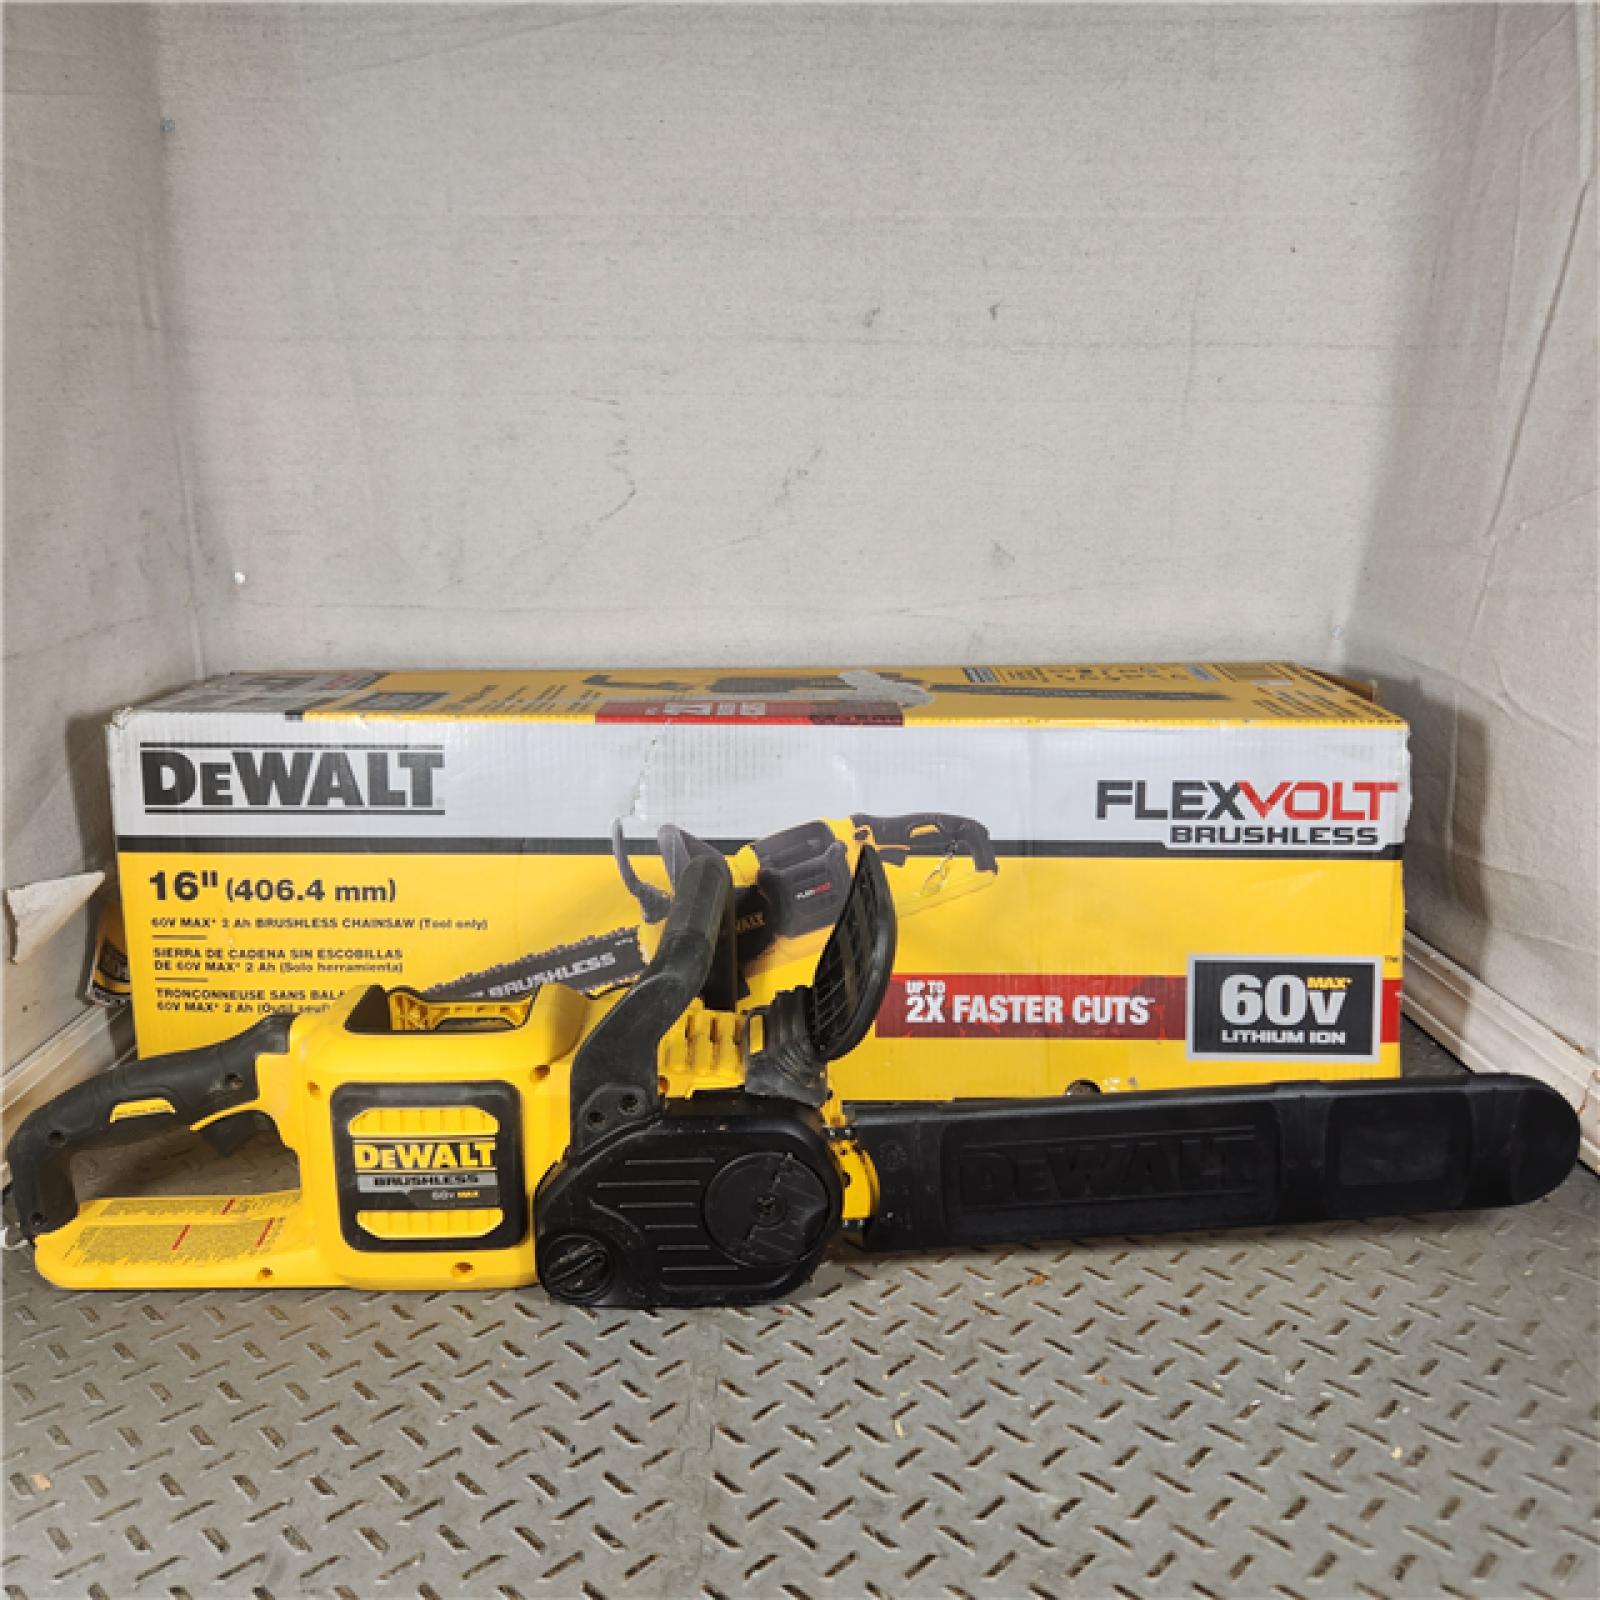 Houston Location - As-Is DEWALT DCCS670B FLEXVOLT 60V MAX Brushless Cordless Chainsaw (Tool Only) - Appears IN Good Condition